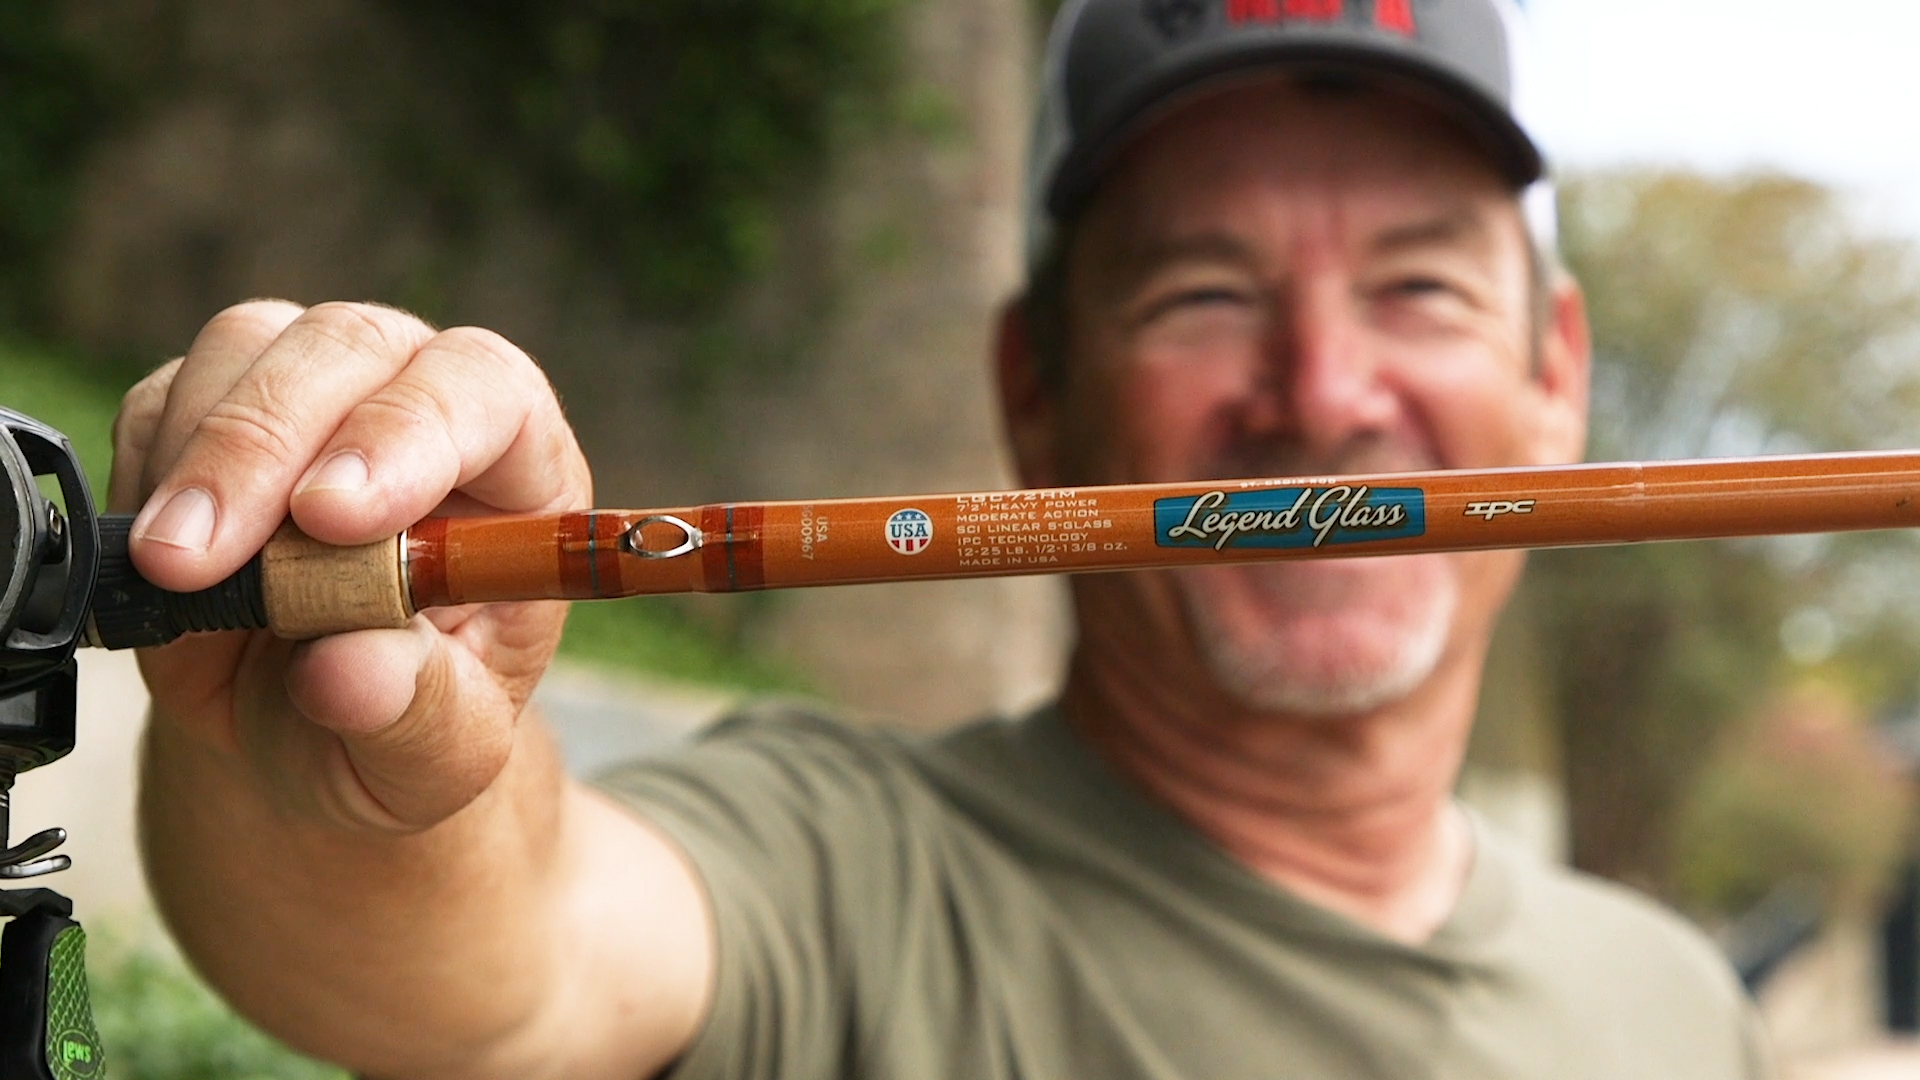 Why Stephen Browning Chooses a St. Croix Legend Glass for Cranking